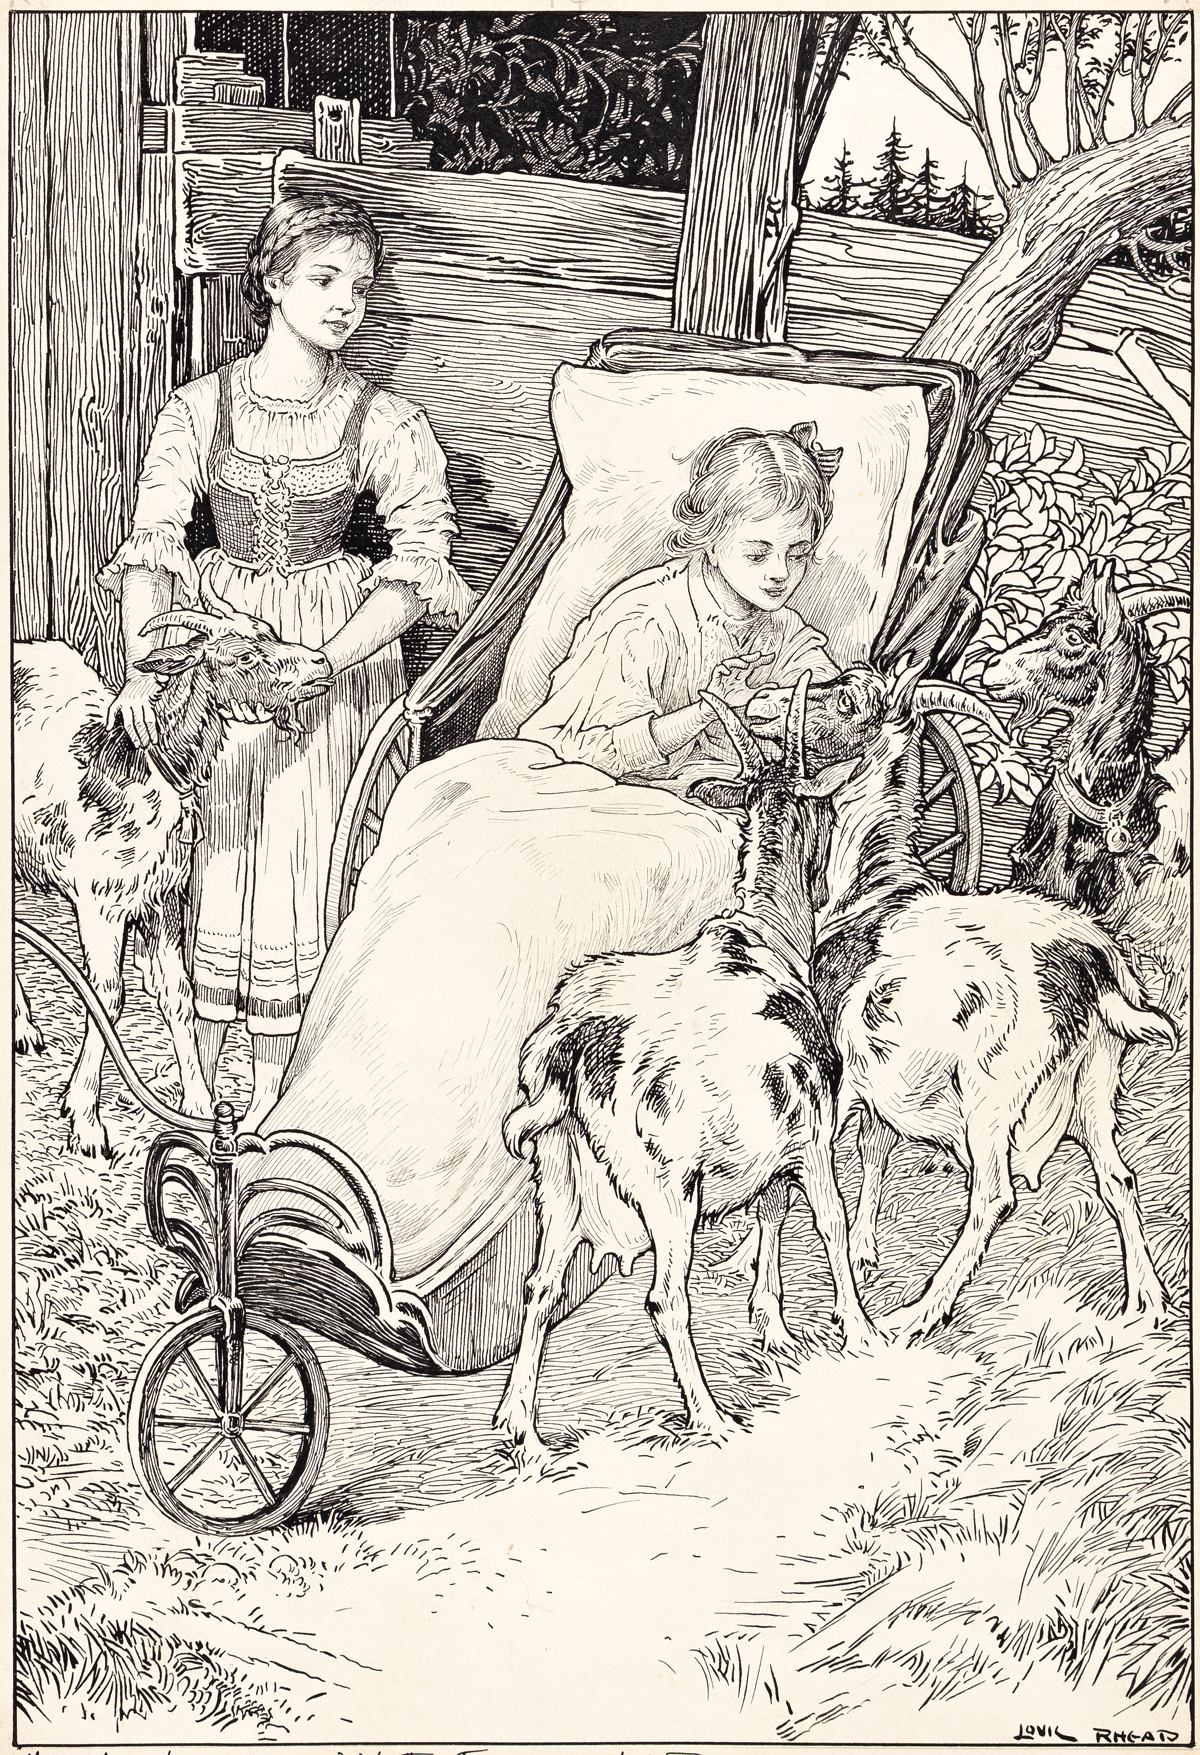 LOUIS RHEAD (1857-1926) Clara on her couch was soon surrounded by the goats. [CHILDRENS]